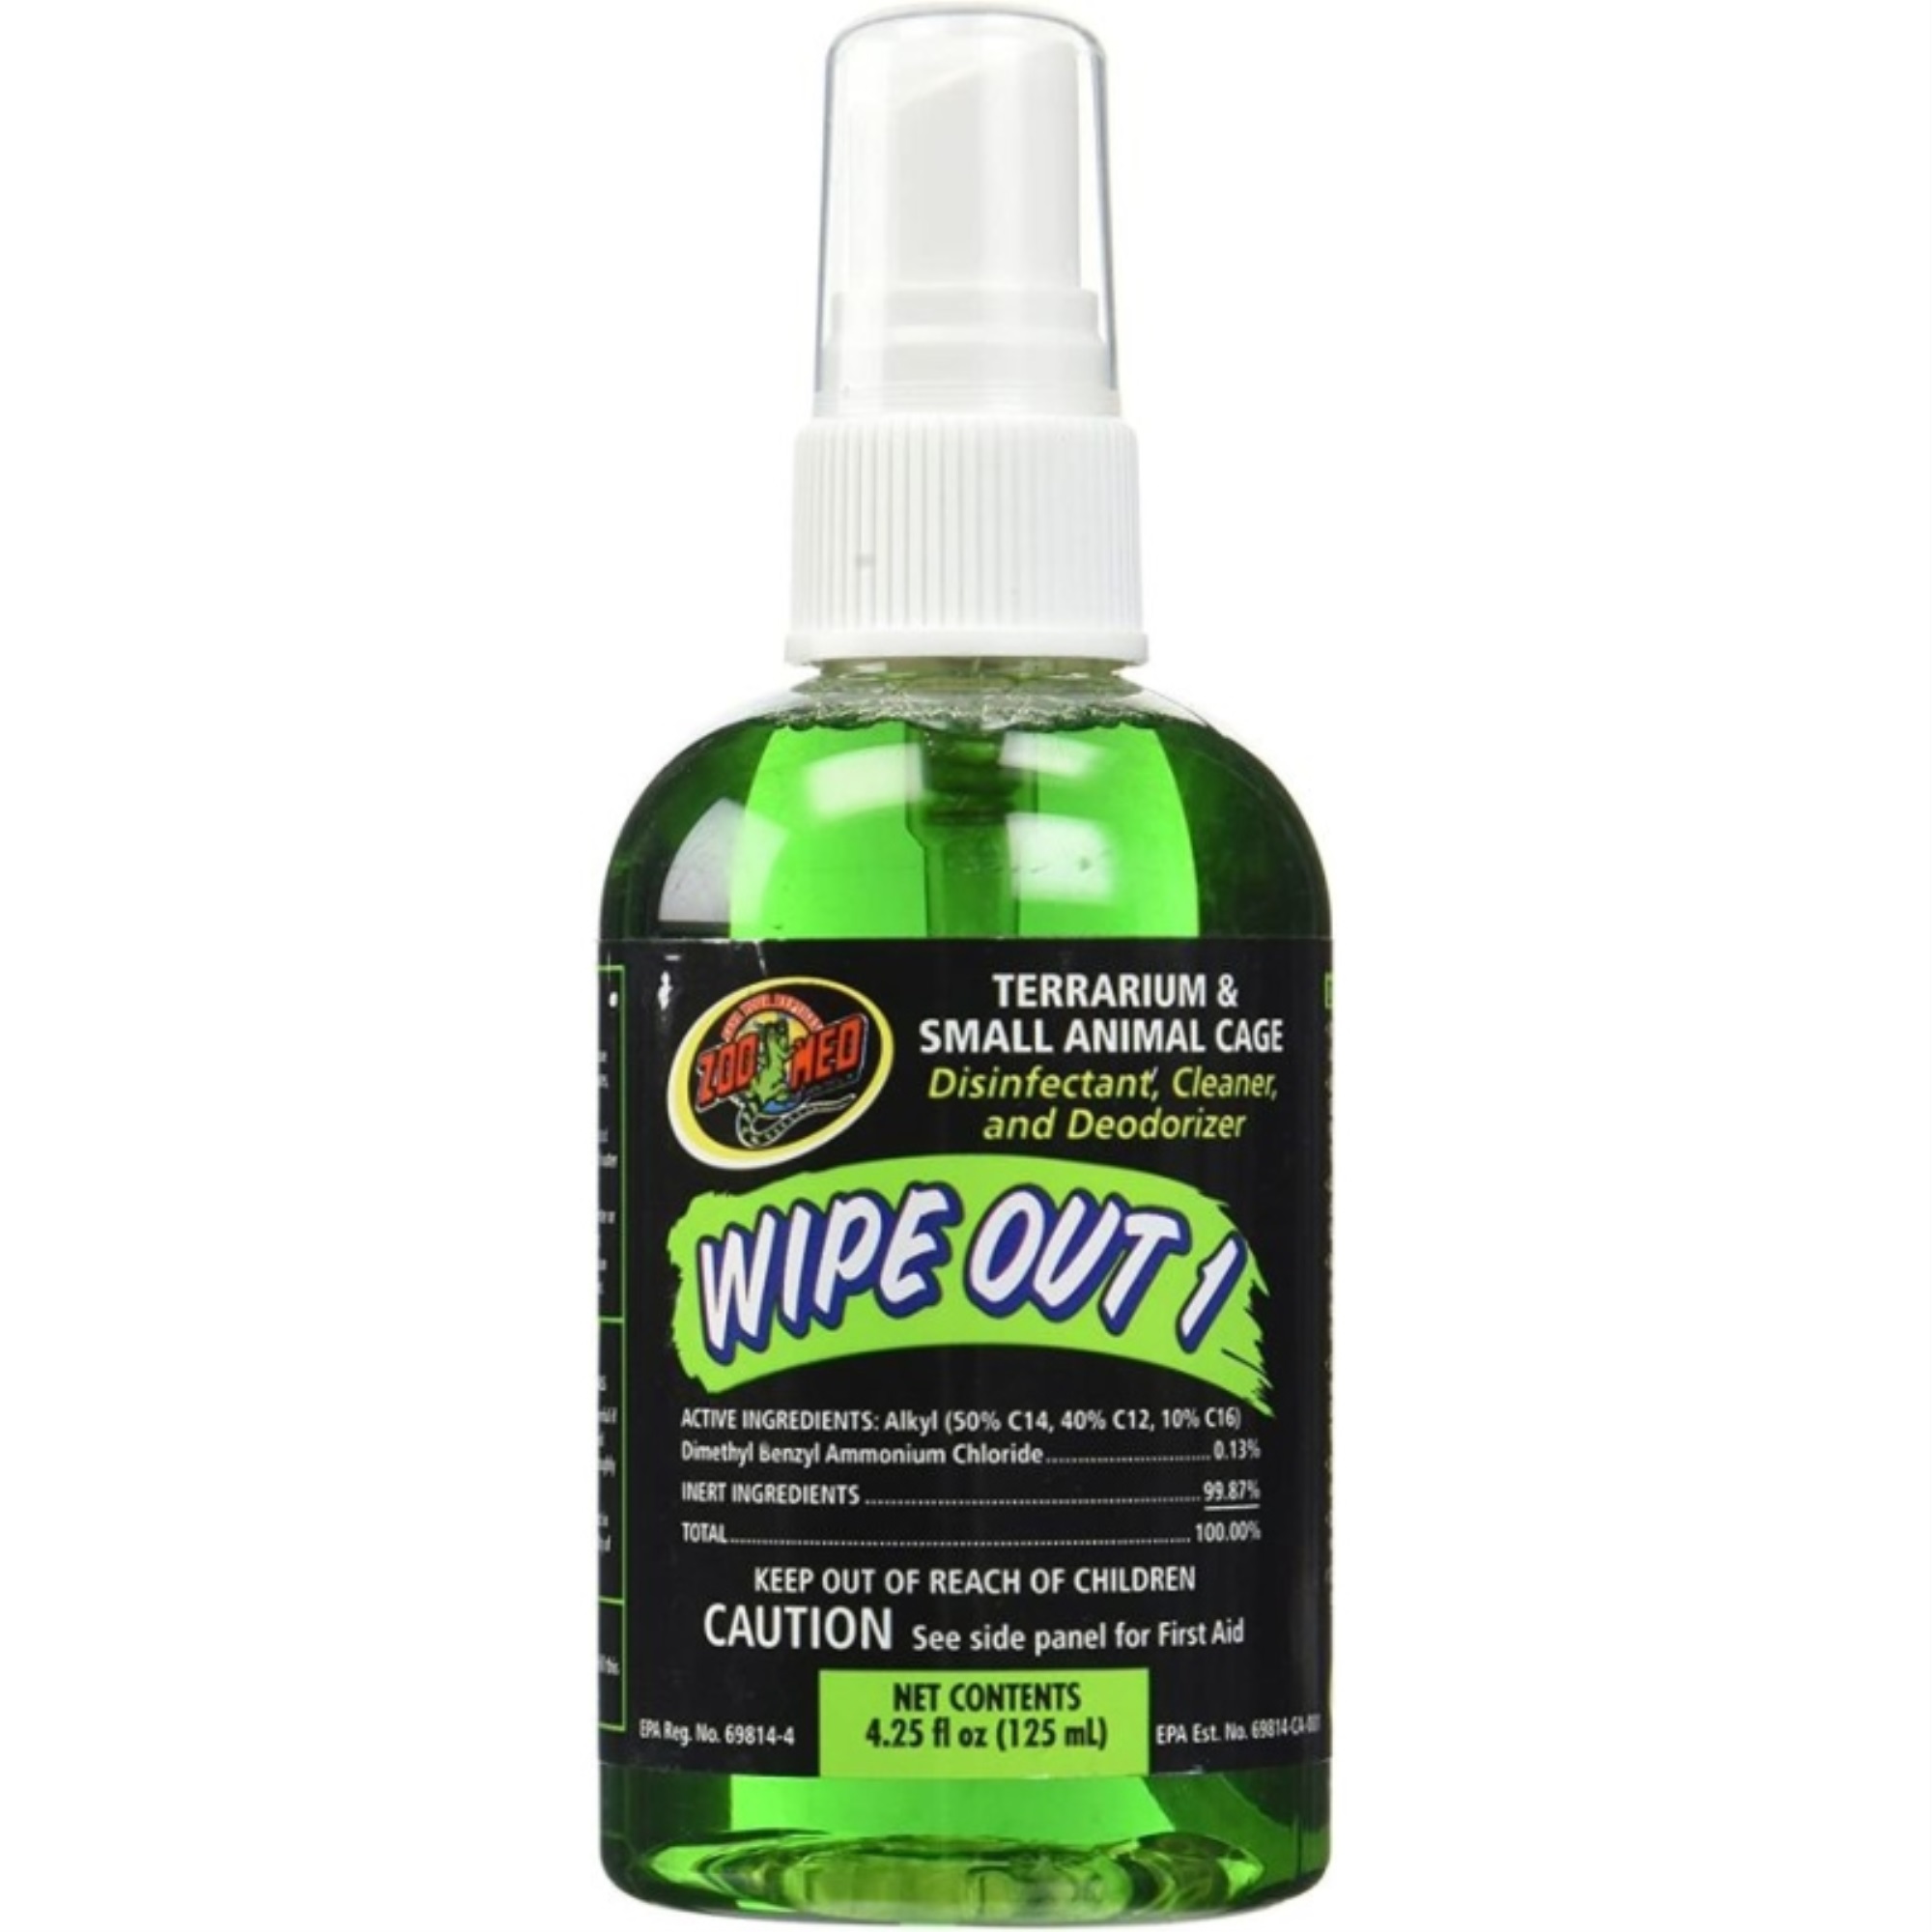 Zoo Med Wipe Out 1, 4.25 oz - image 1 of 2